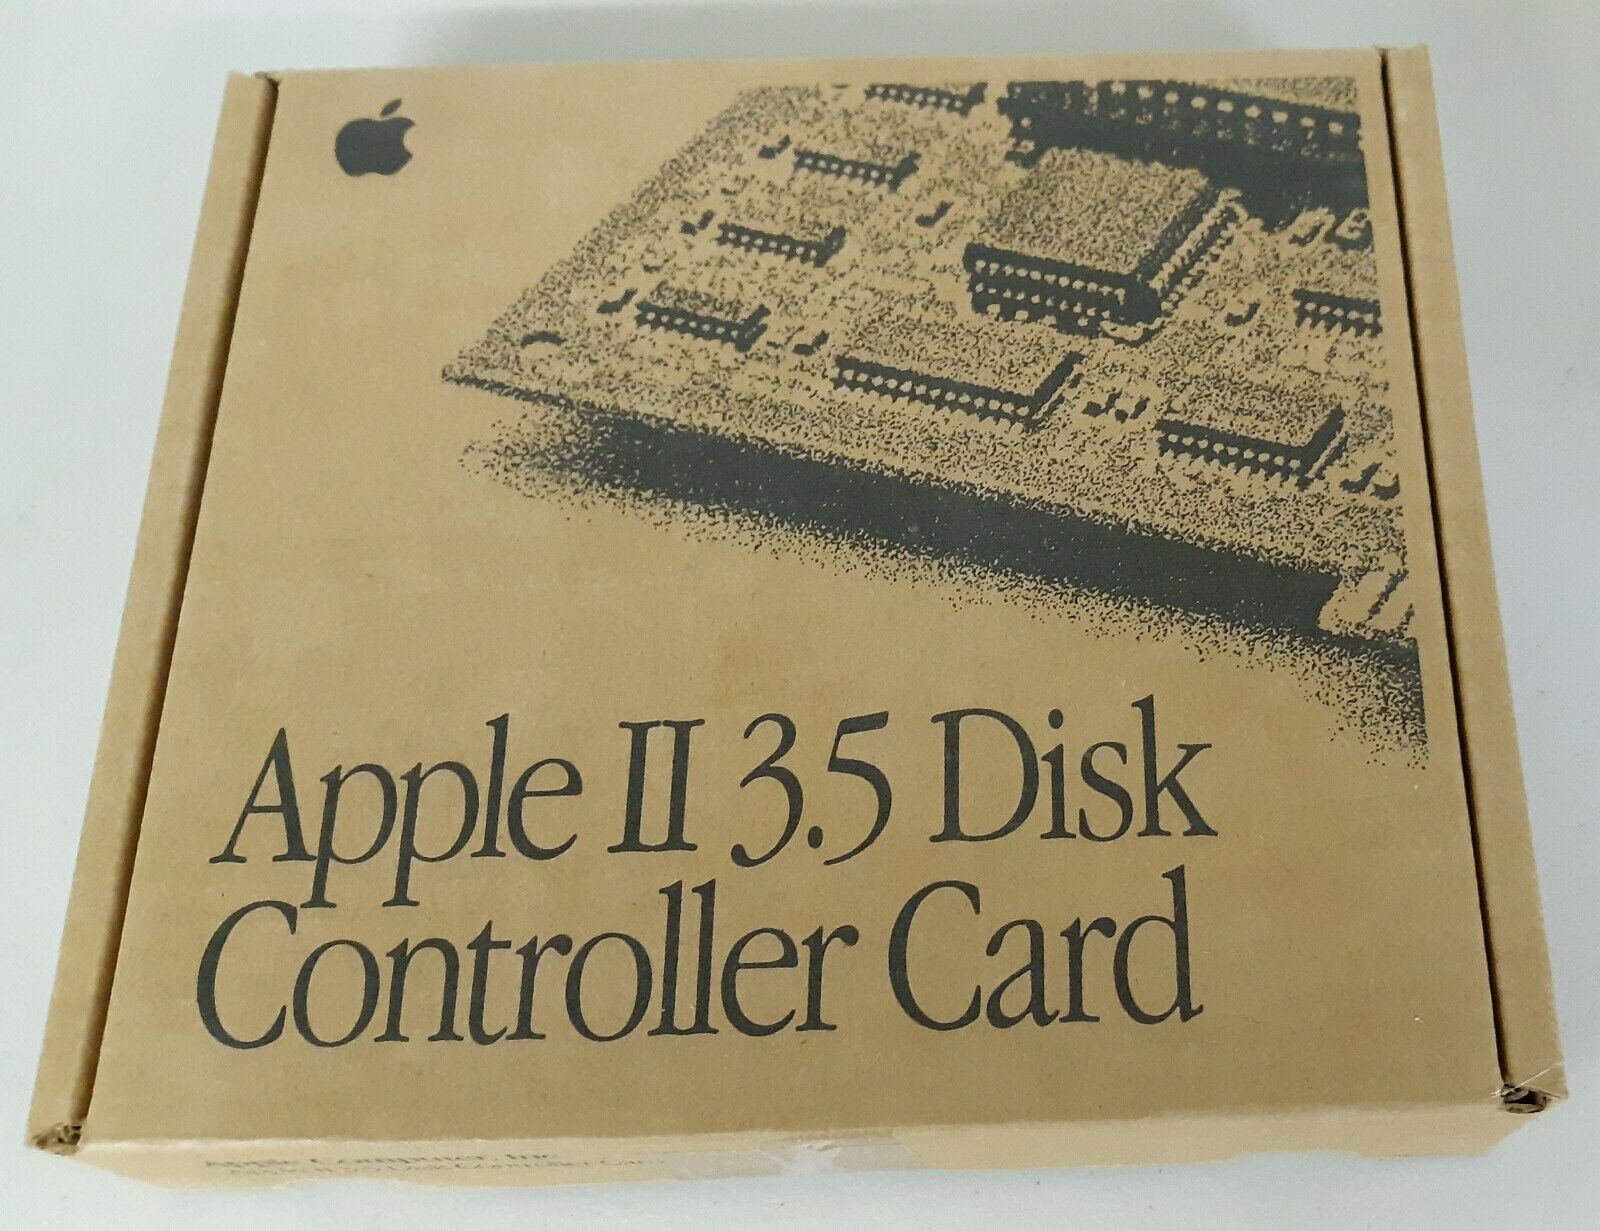 NEW IN BOX 3.5 DISK SUPERDRIVE/UNIDISK CONTROLLER CARD APPLE IIE,IIGS SEALED 